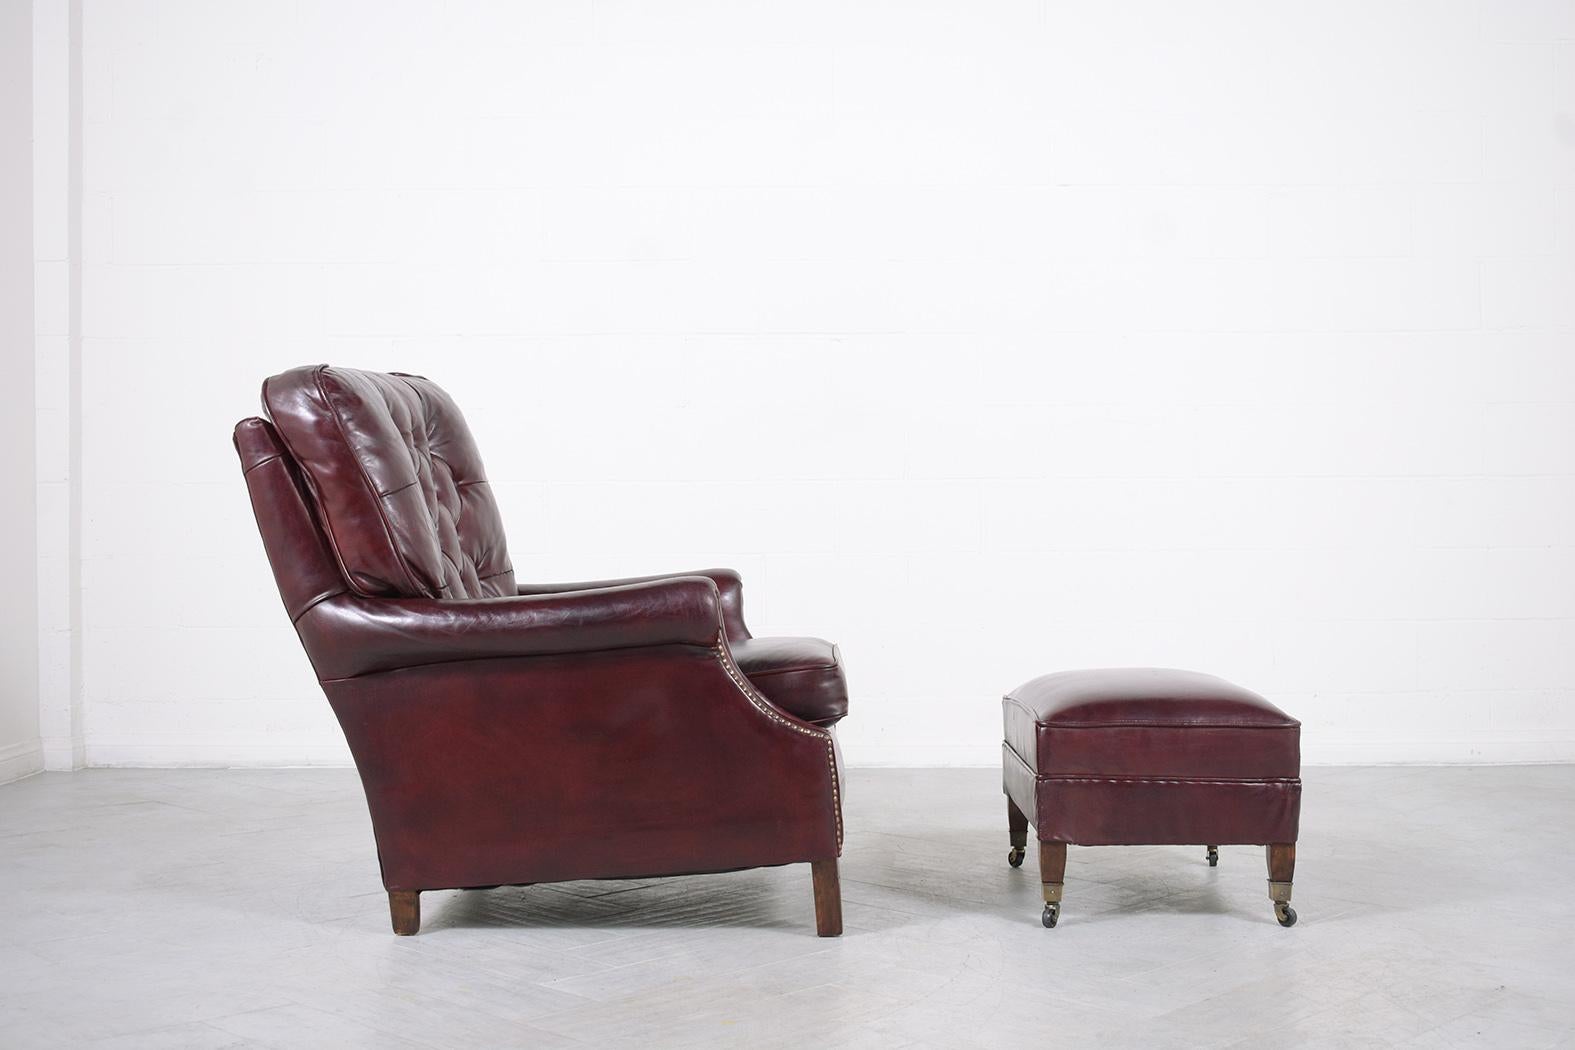 Stained Antique English Chesterfield Lounge Chair: Cordovan Red Leather Tufted Design For Sale